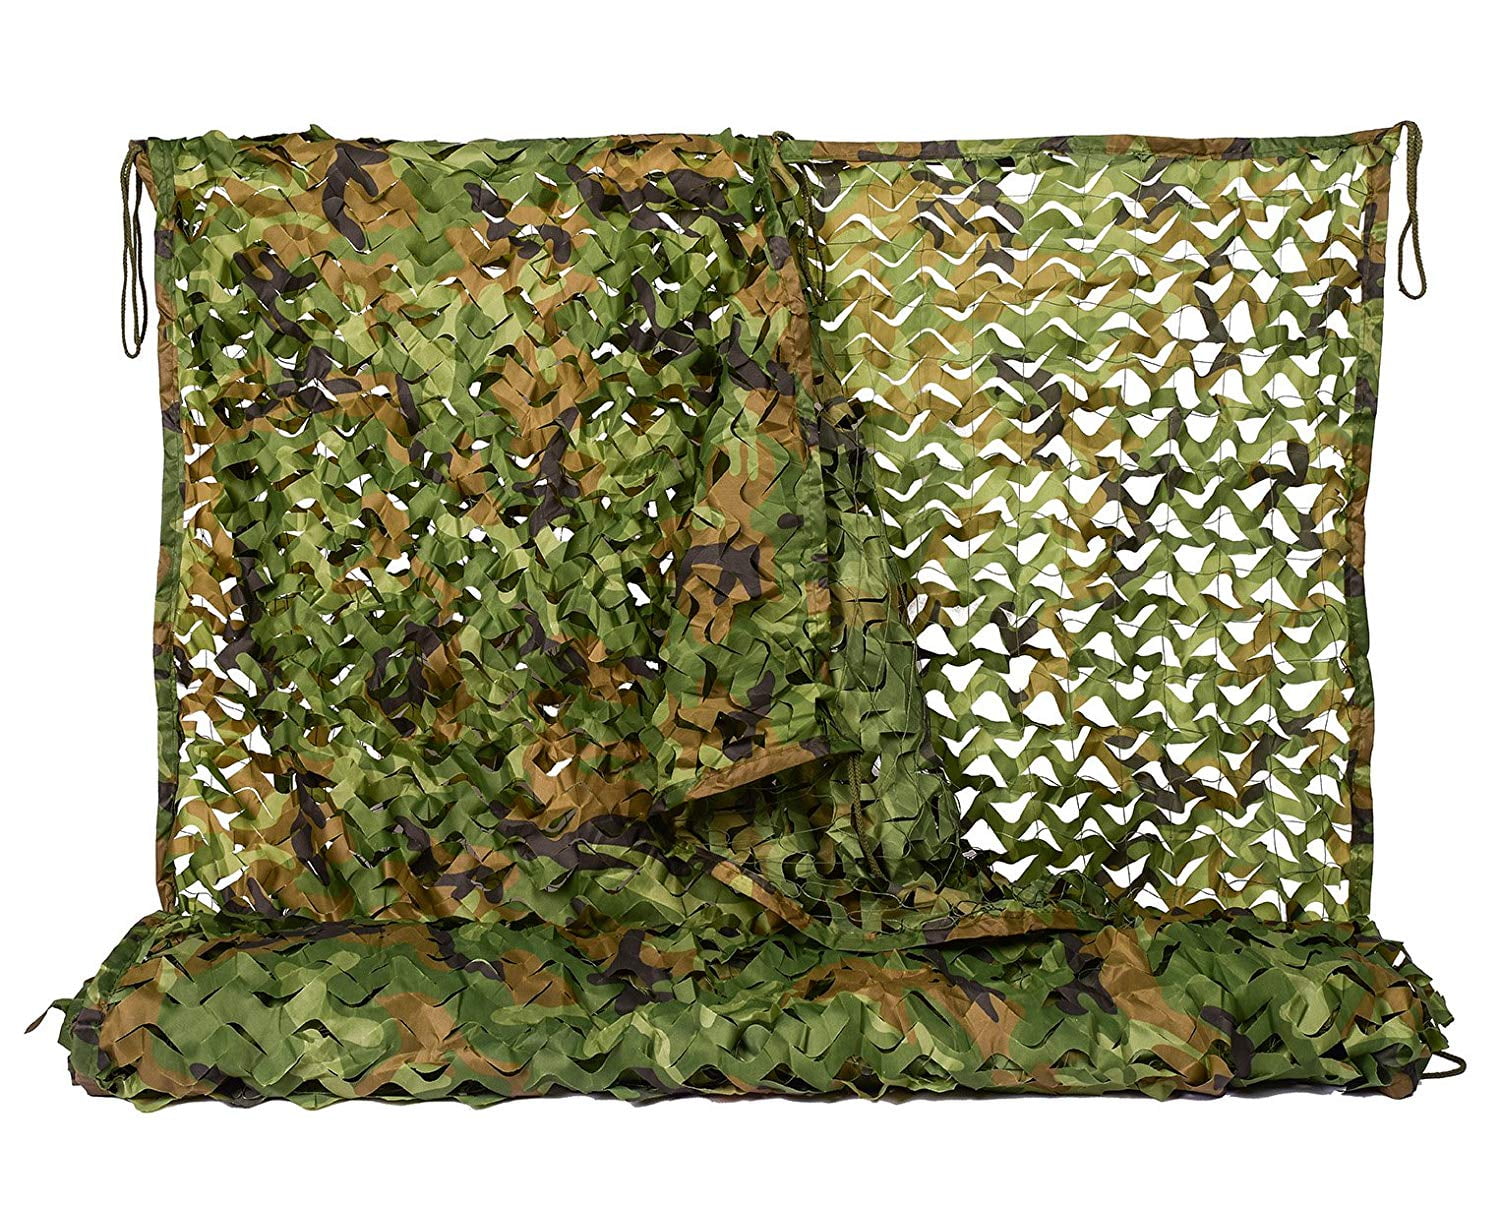 1Mx2M Woodland Camouflage Camo Netting Jungle Camping Military Hunting 